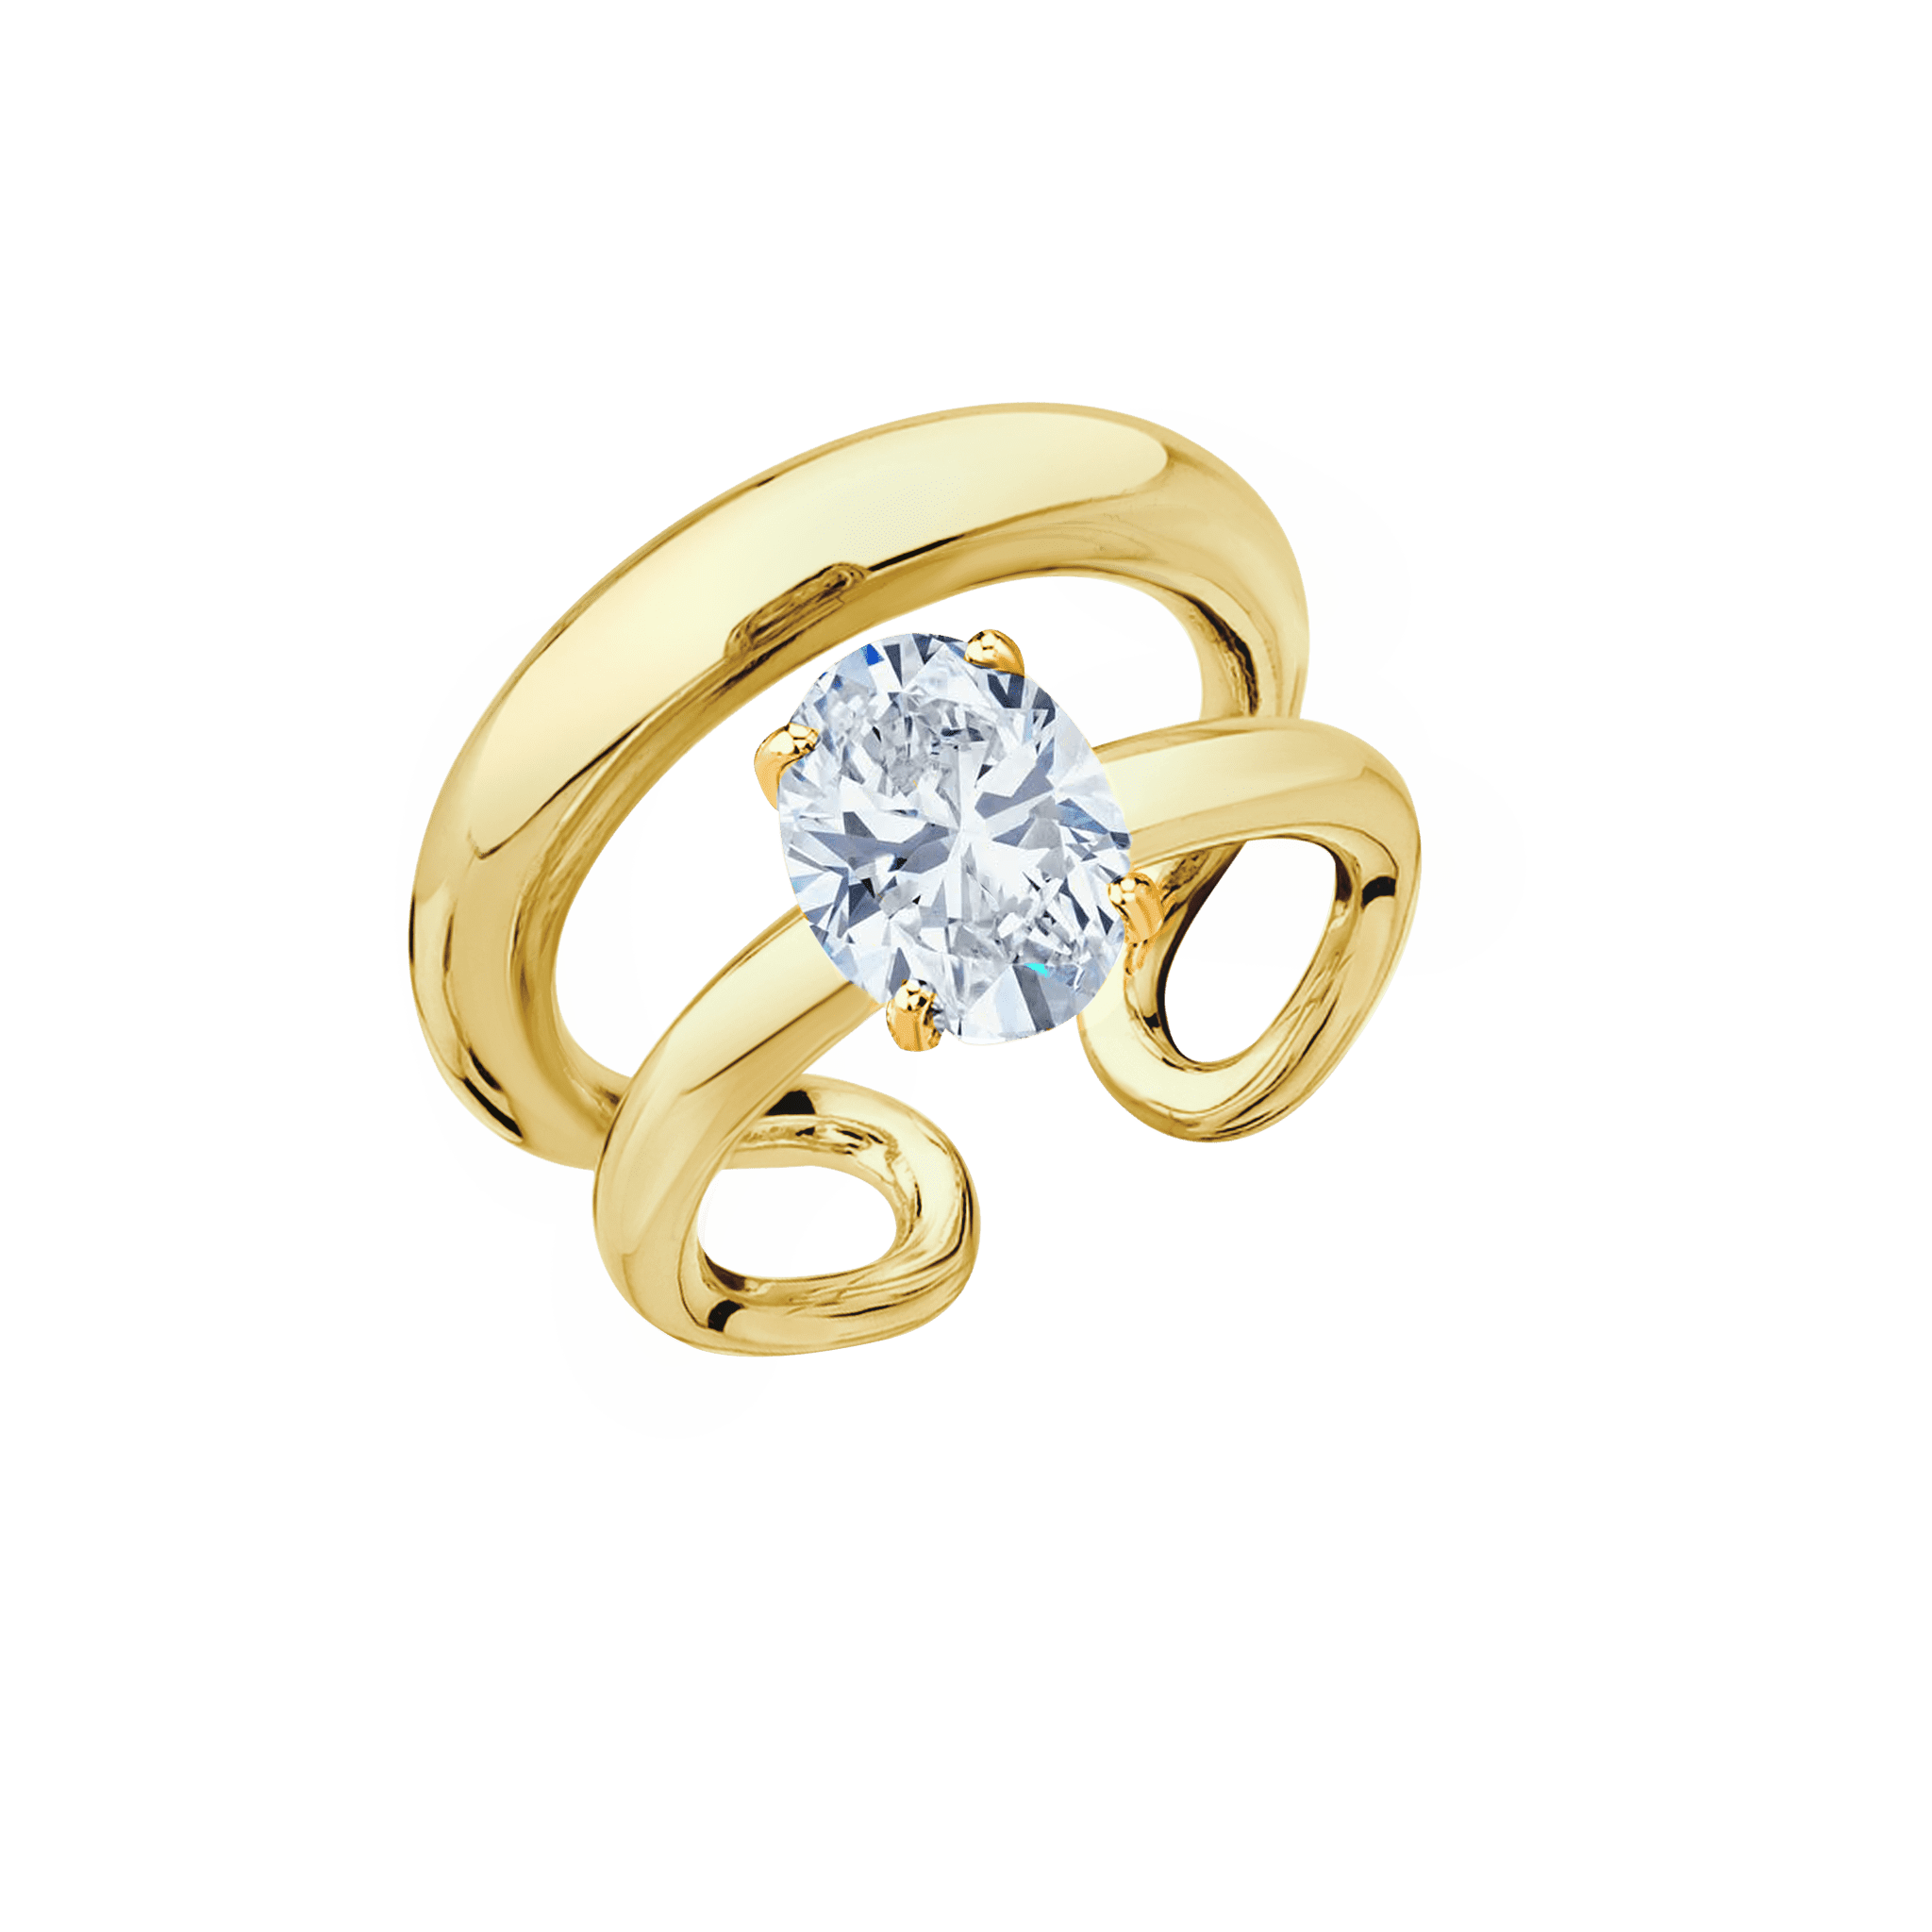 Twin Tusk Ring with Suspended Oval Diamond